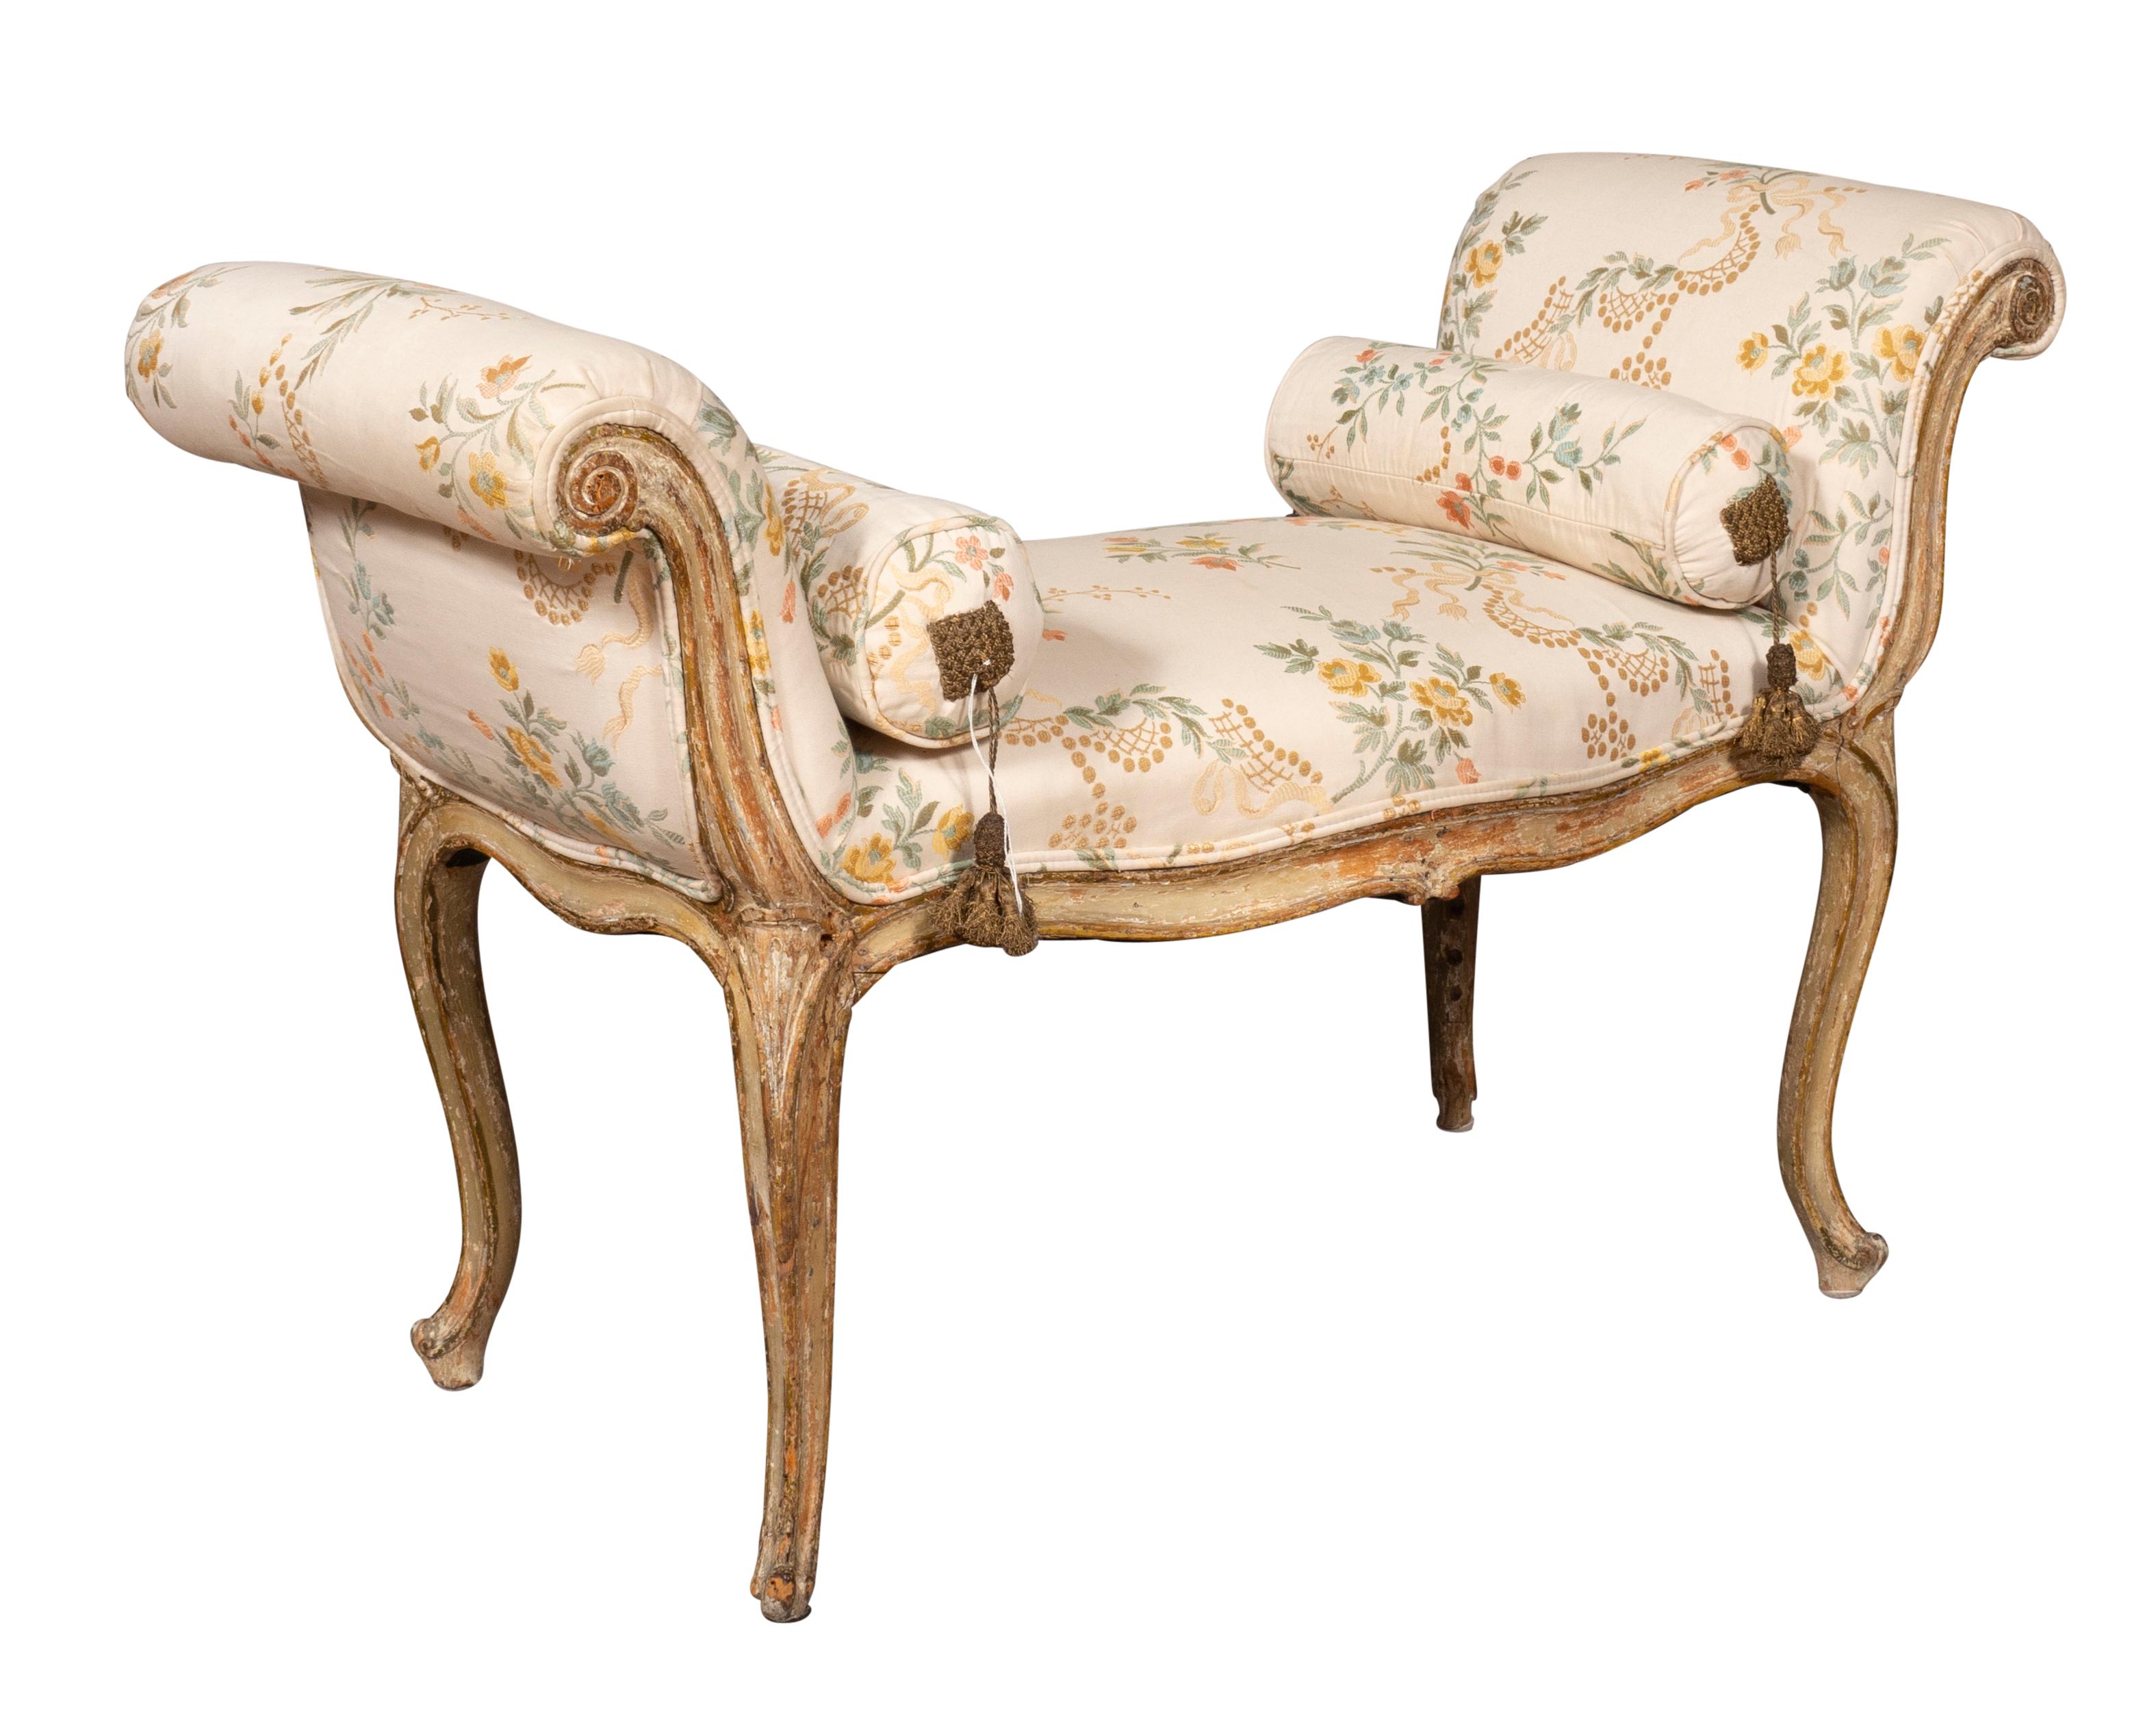 With wonderful old painted surface with good lines. With scrolled arms and cabriole legs in the French taste. Upholstered in a silk fabric with bolster pillows. From a Florida estate.